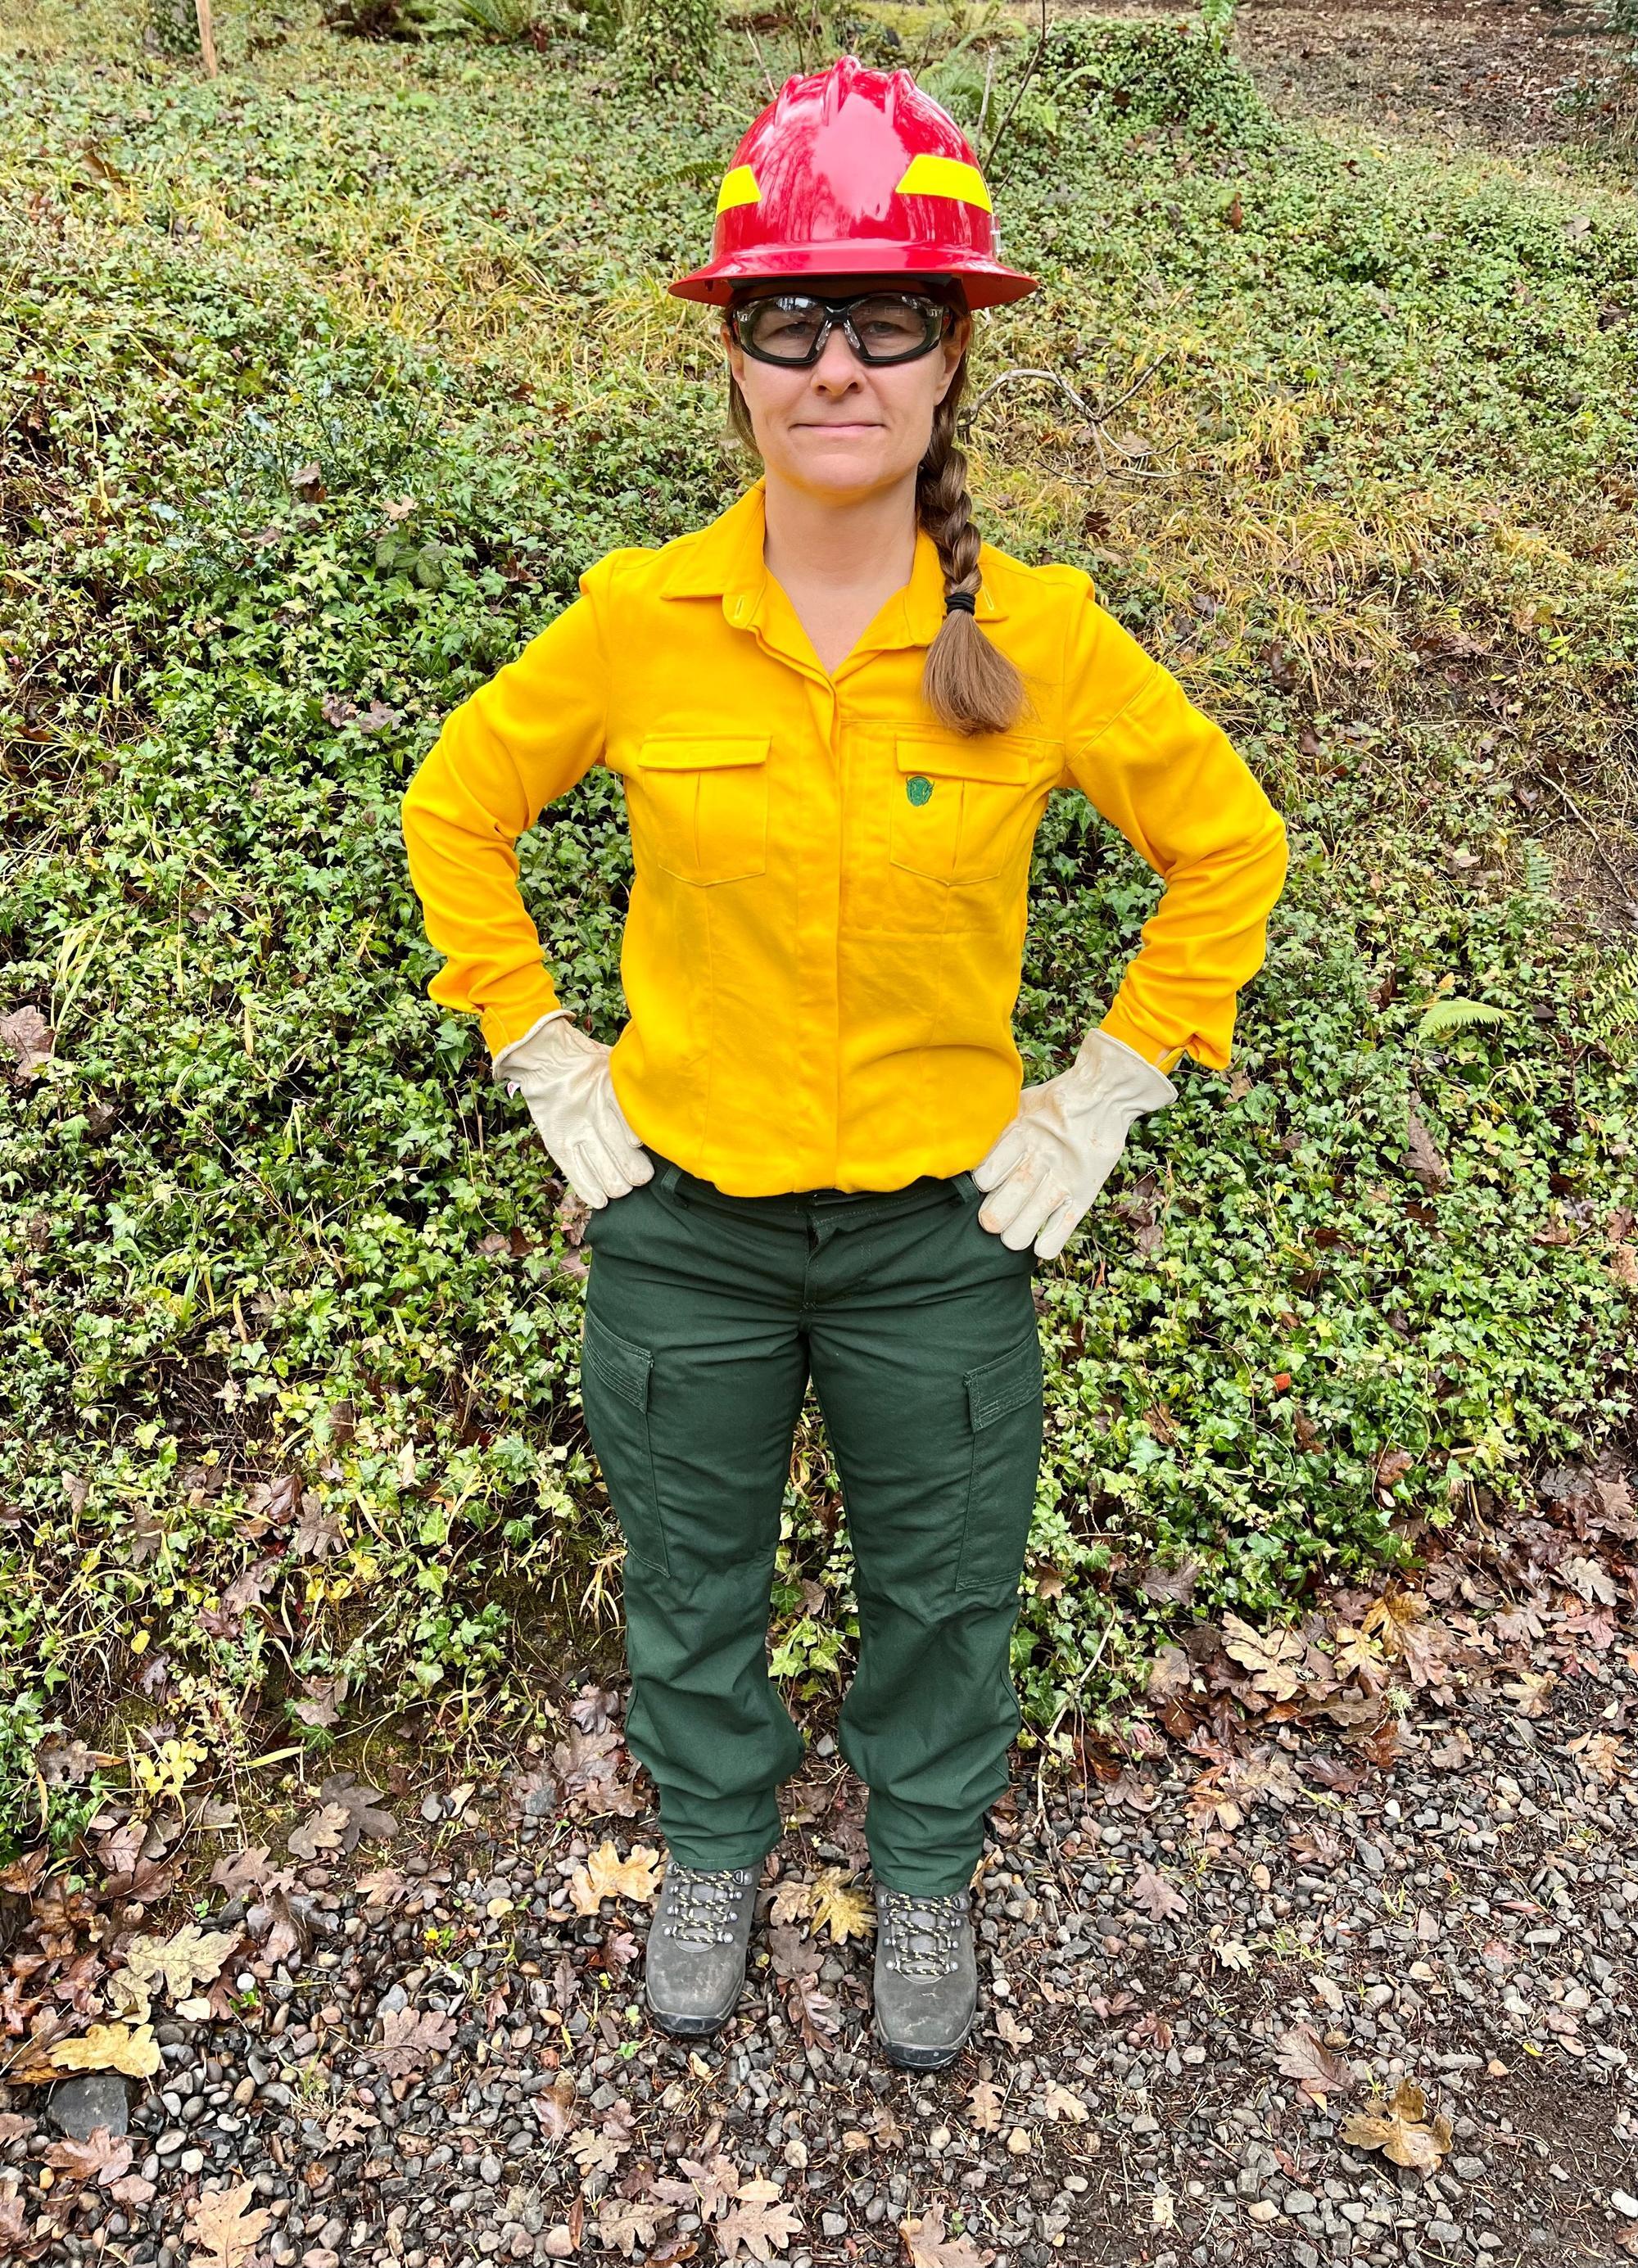 woman wearing helmet, glovers, full-length pants and yellow shirt